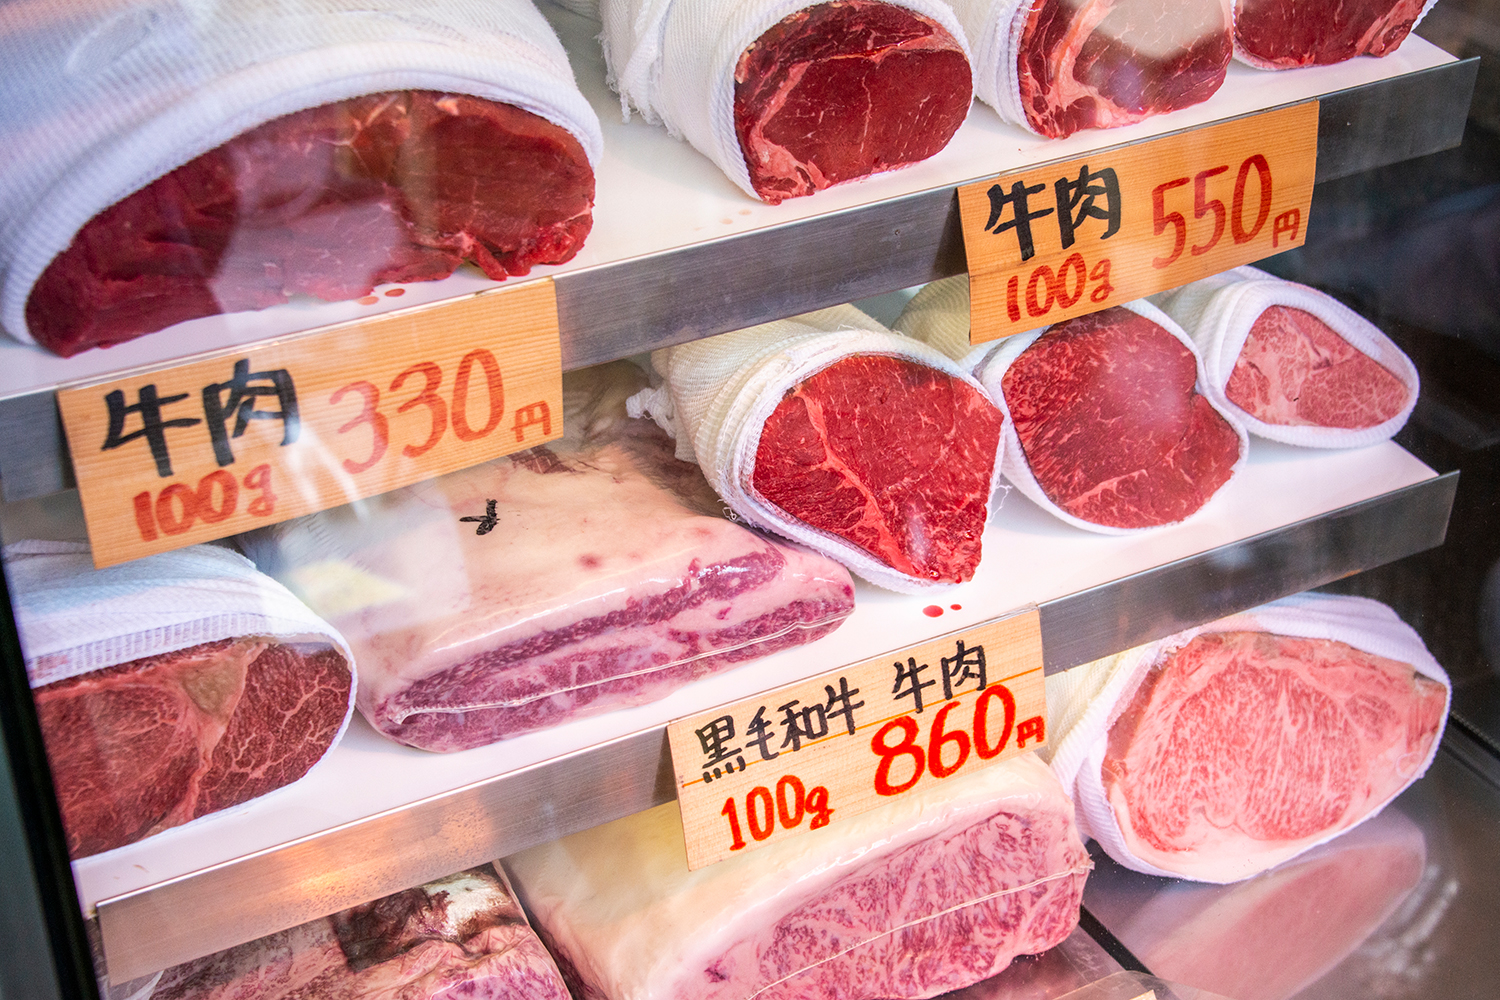 Everything you need to know about wagyu beef - Reviewed